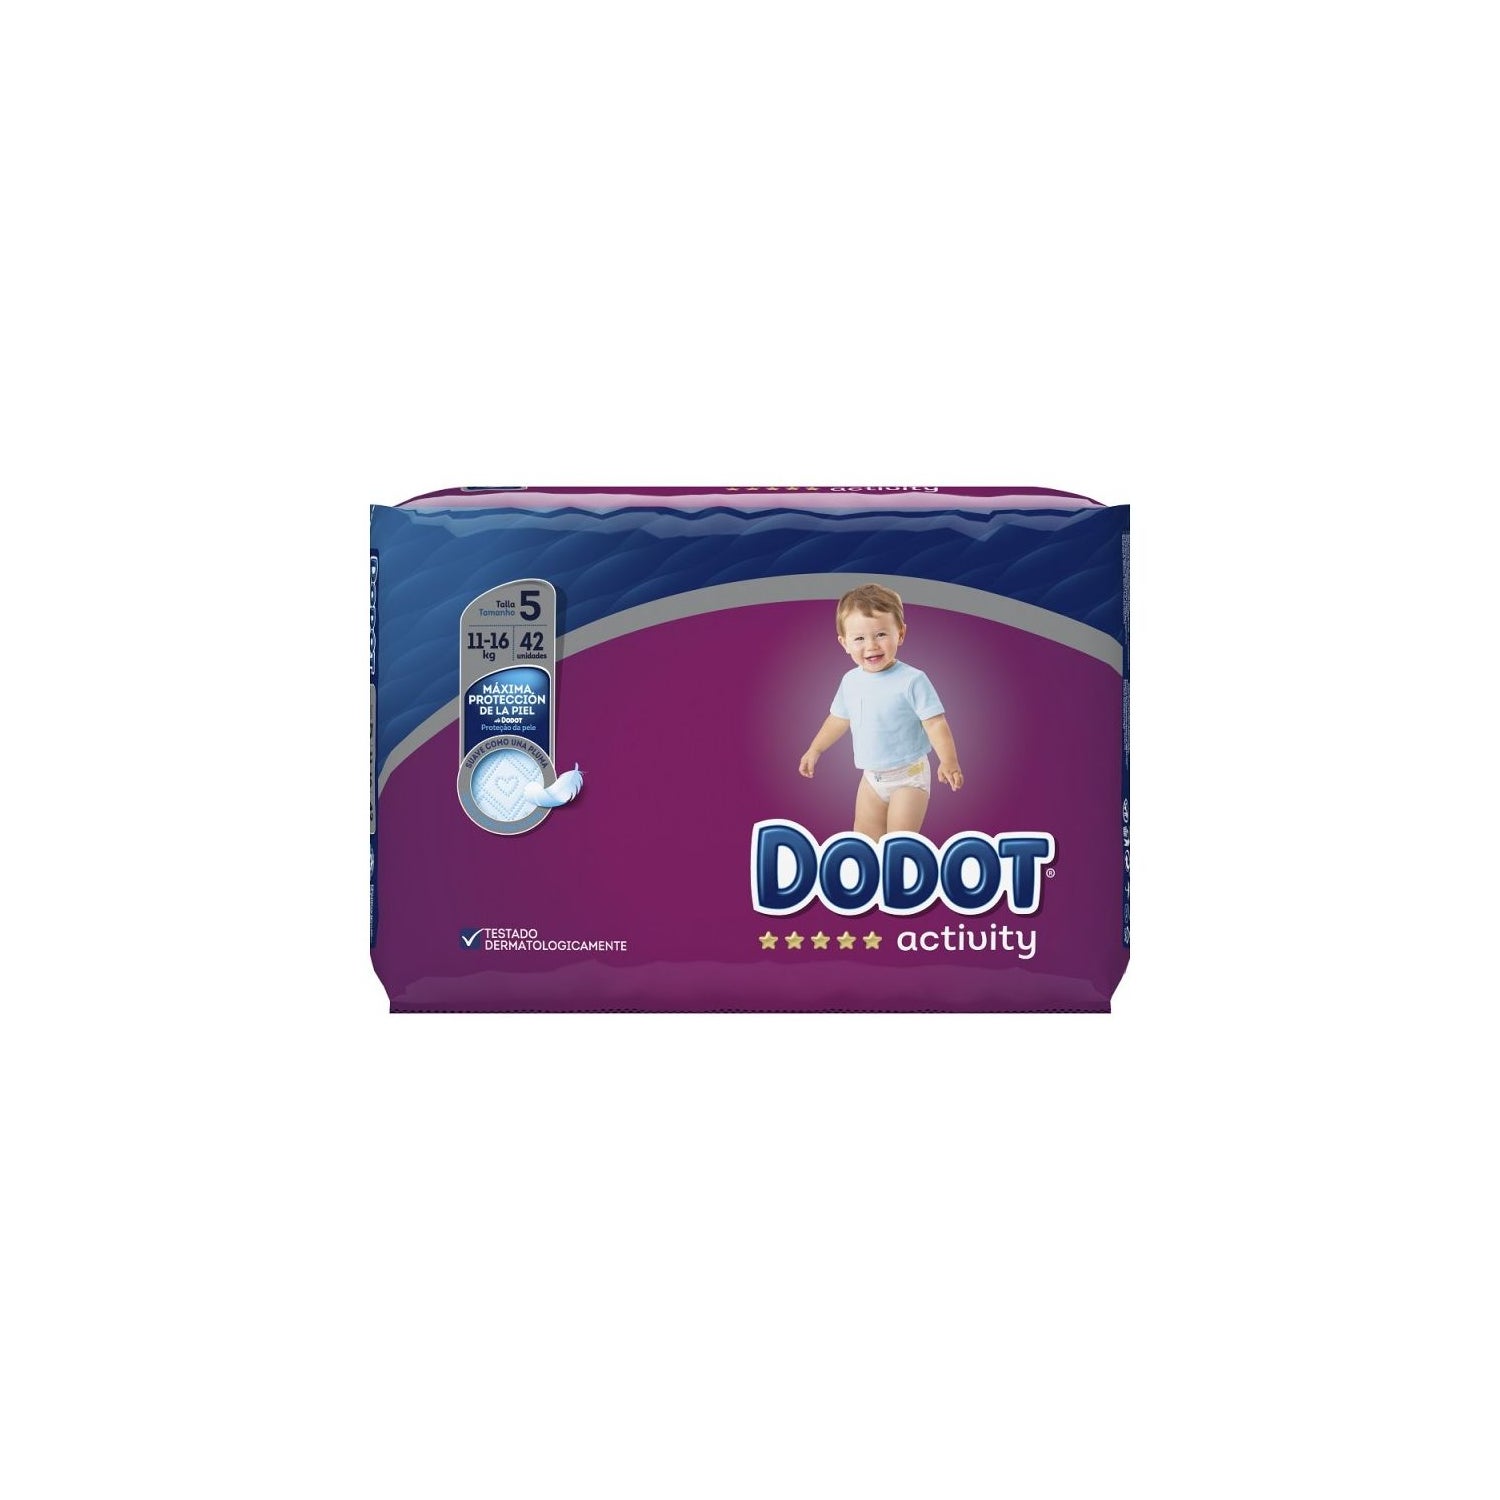 Dodot Diapers Pants Stages Size 5 58 Units